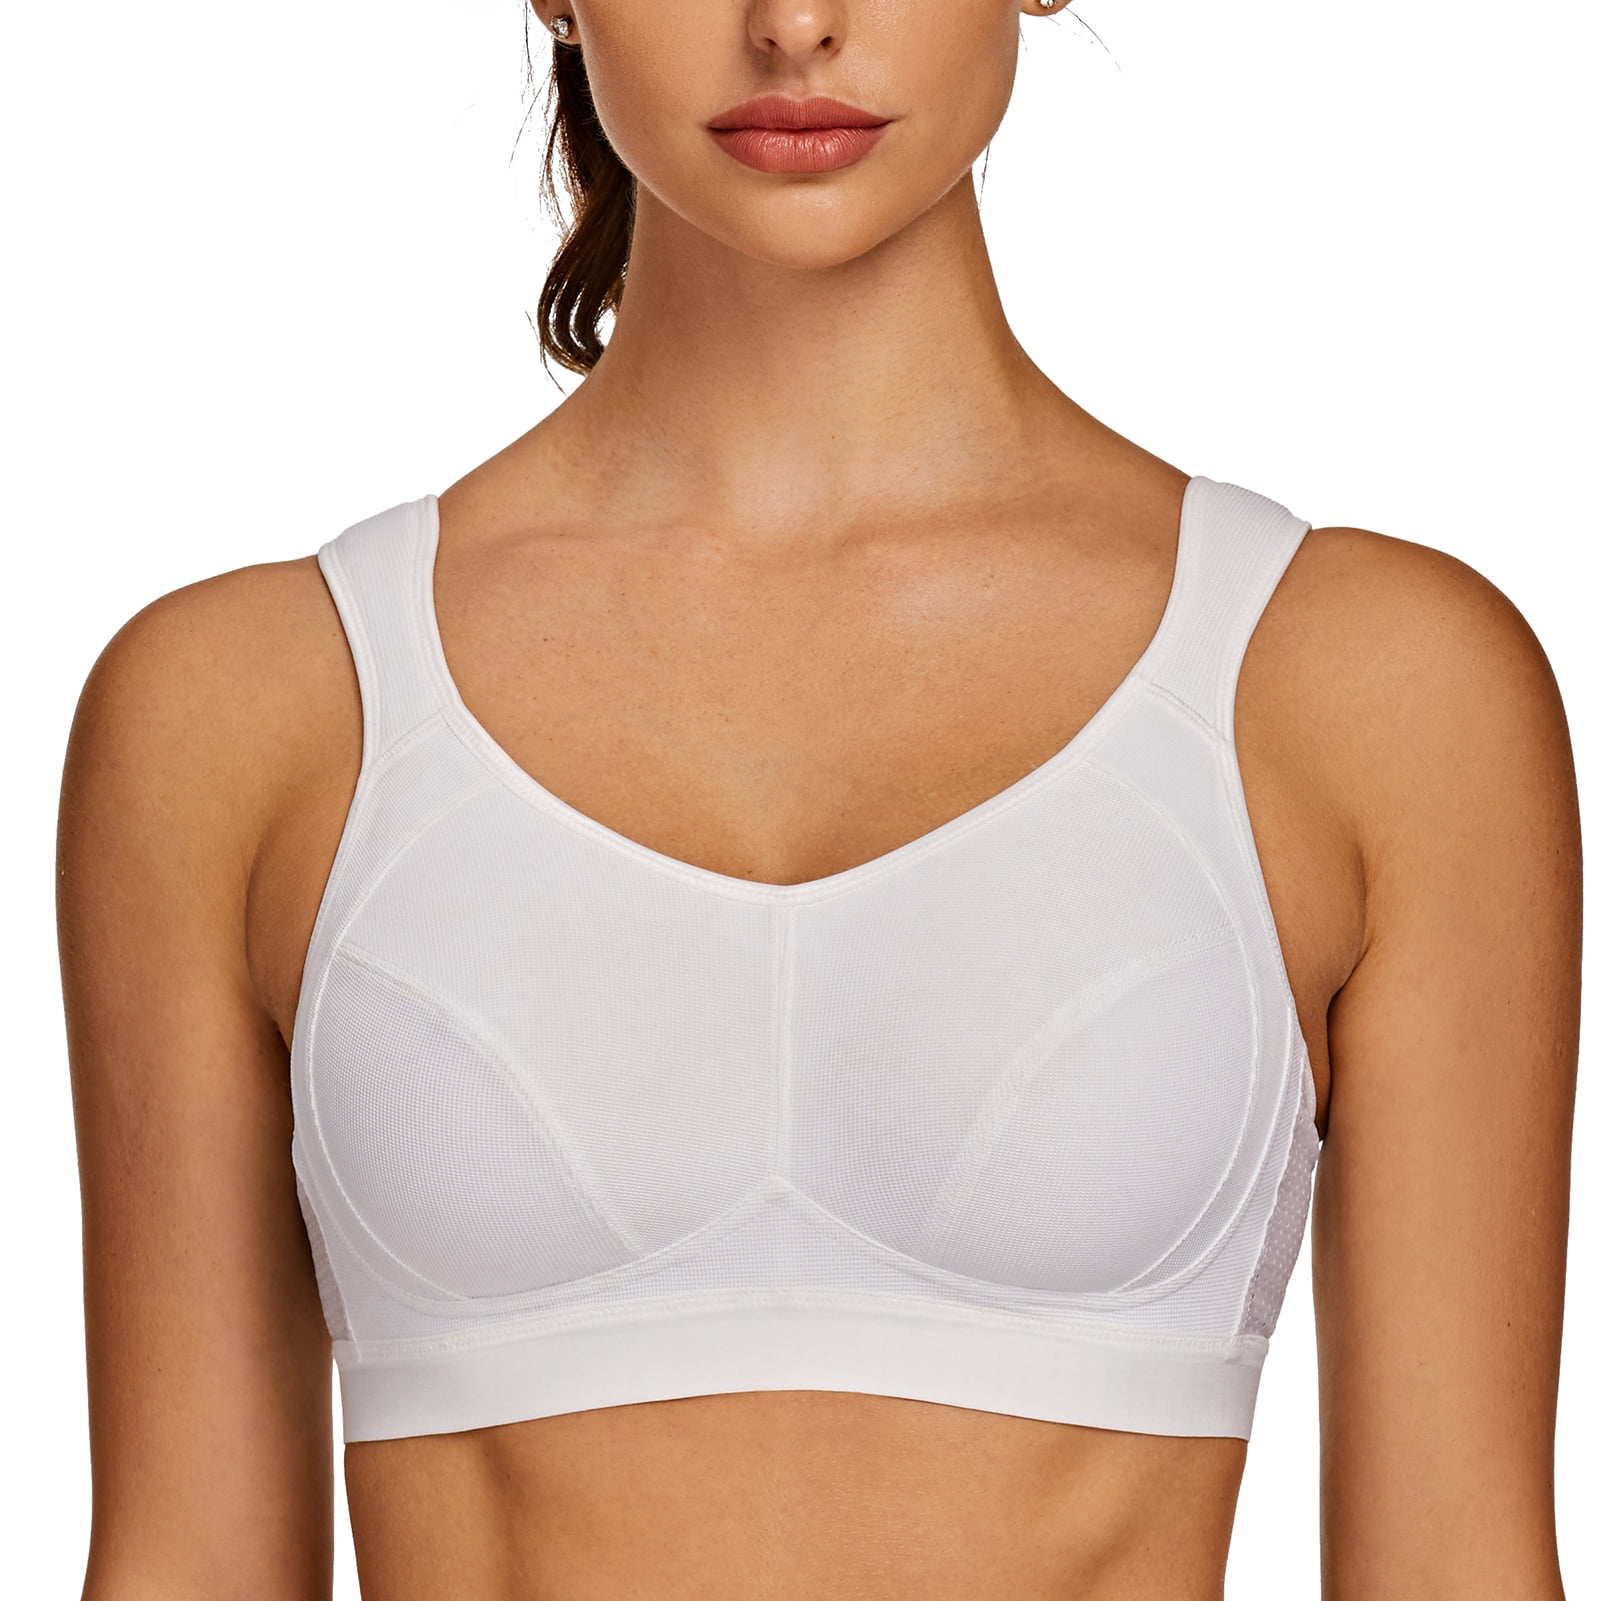 AGONVIN Women's High Impact Support Wirefree Bounce Control Plus Size  Workout Sports Bra White 34E - Walmart.com